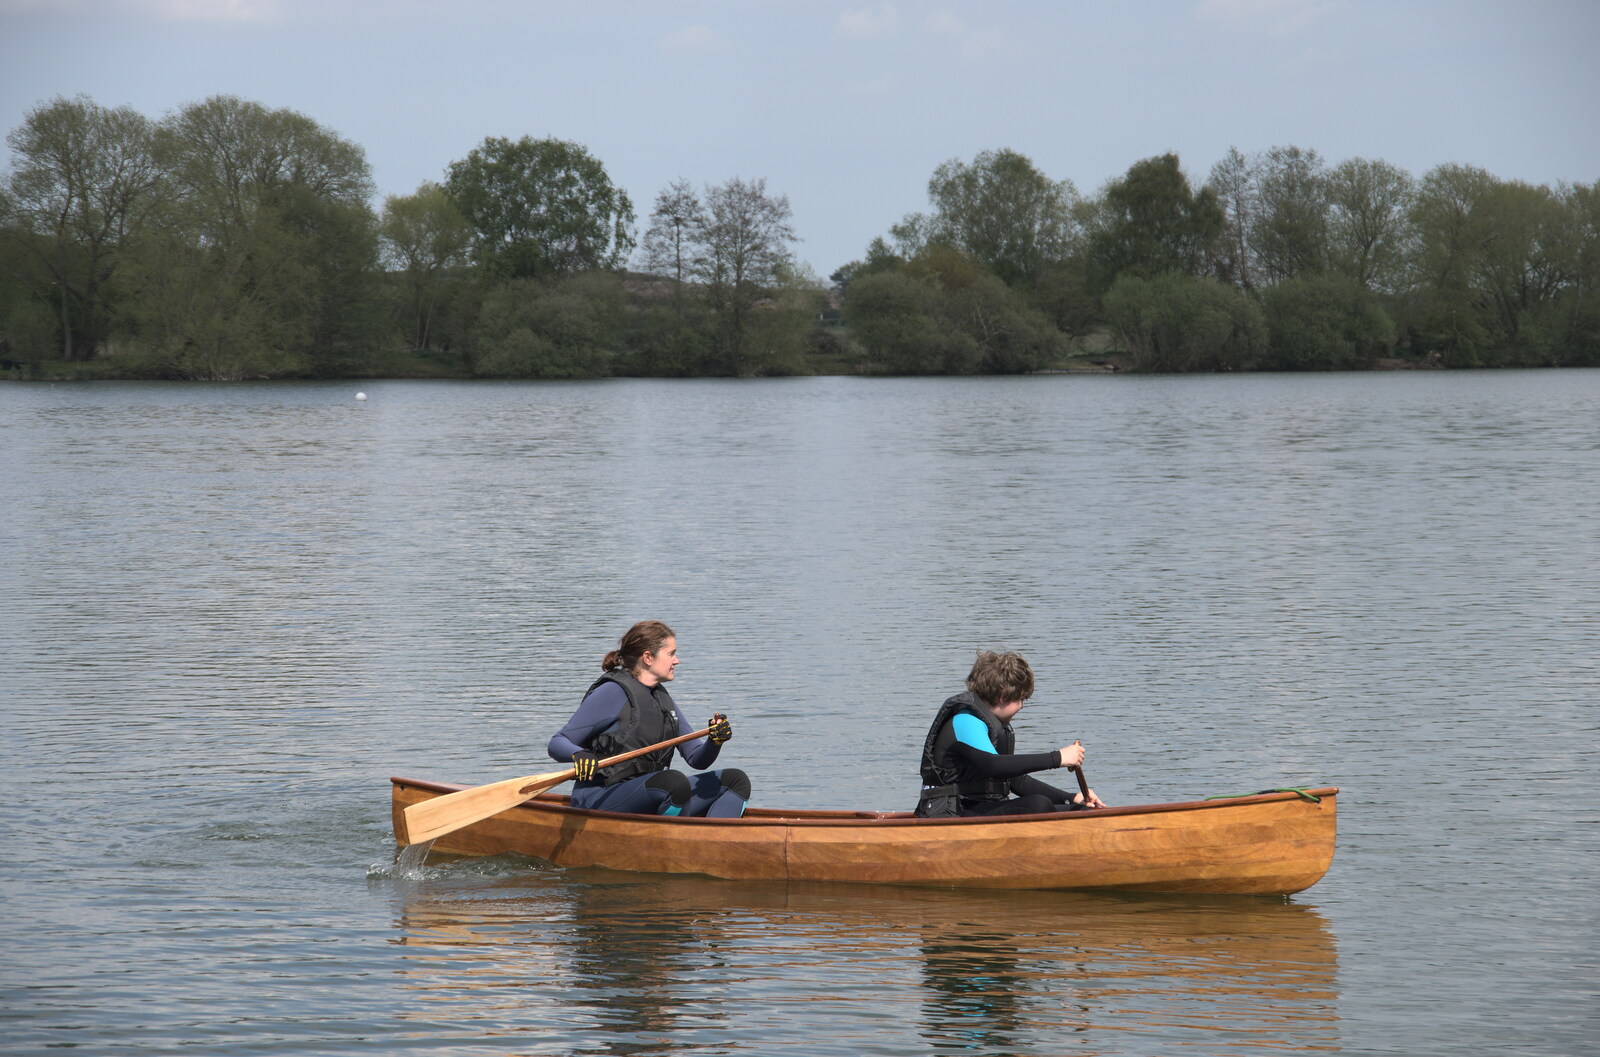 The Canoe's First Outing, Weybread Lake, Harleston - 1st May 2022: Isobel and Fred paddle around